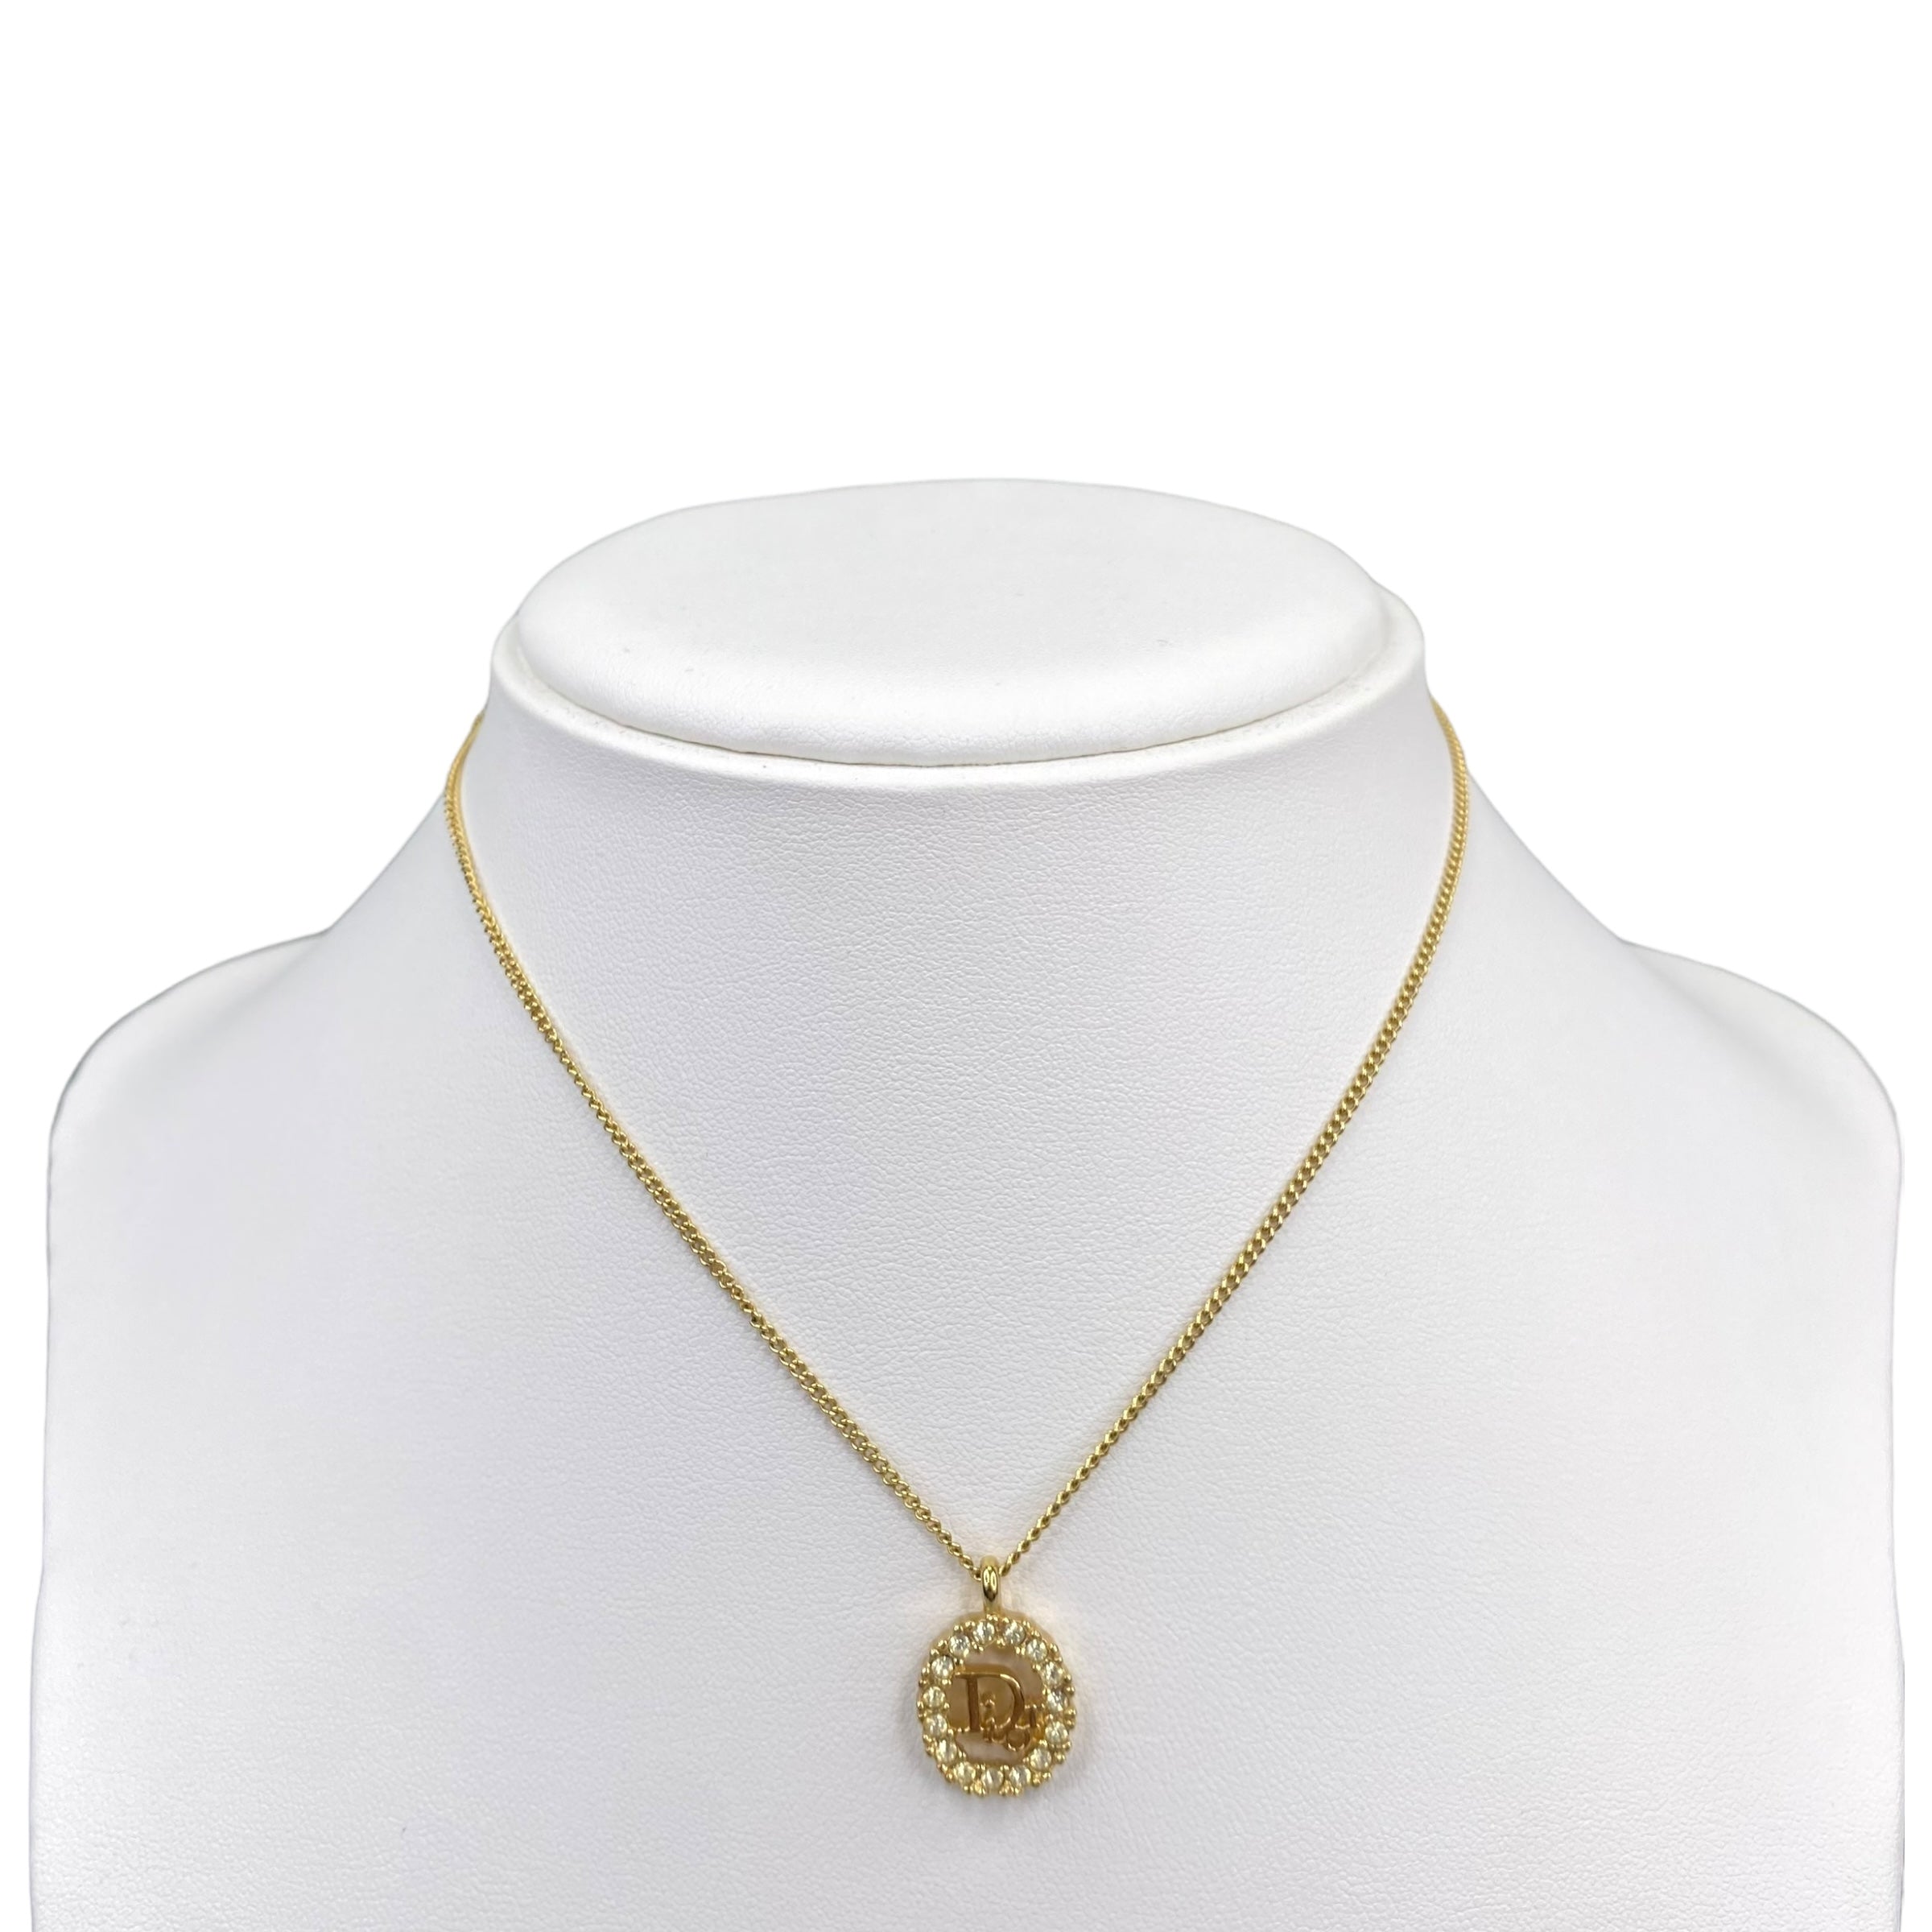 DIOR RHINESTONE ENCRUSTED OVAL OBLIQUE PENDANT NECKLACE GOLD-PLATED